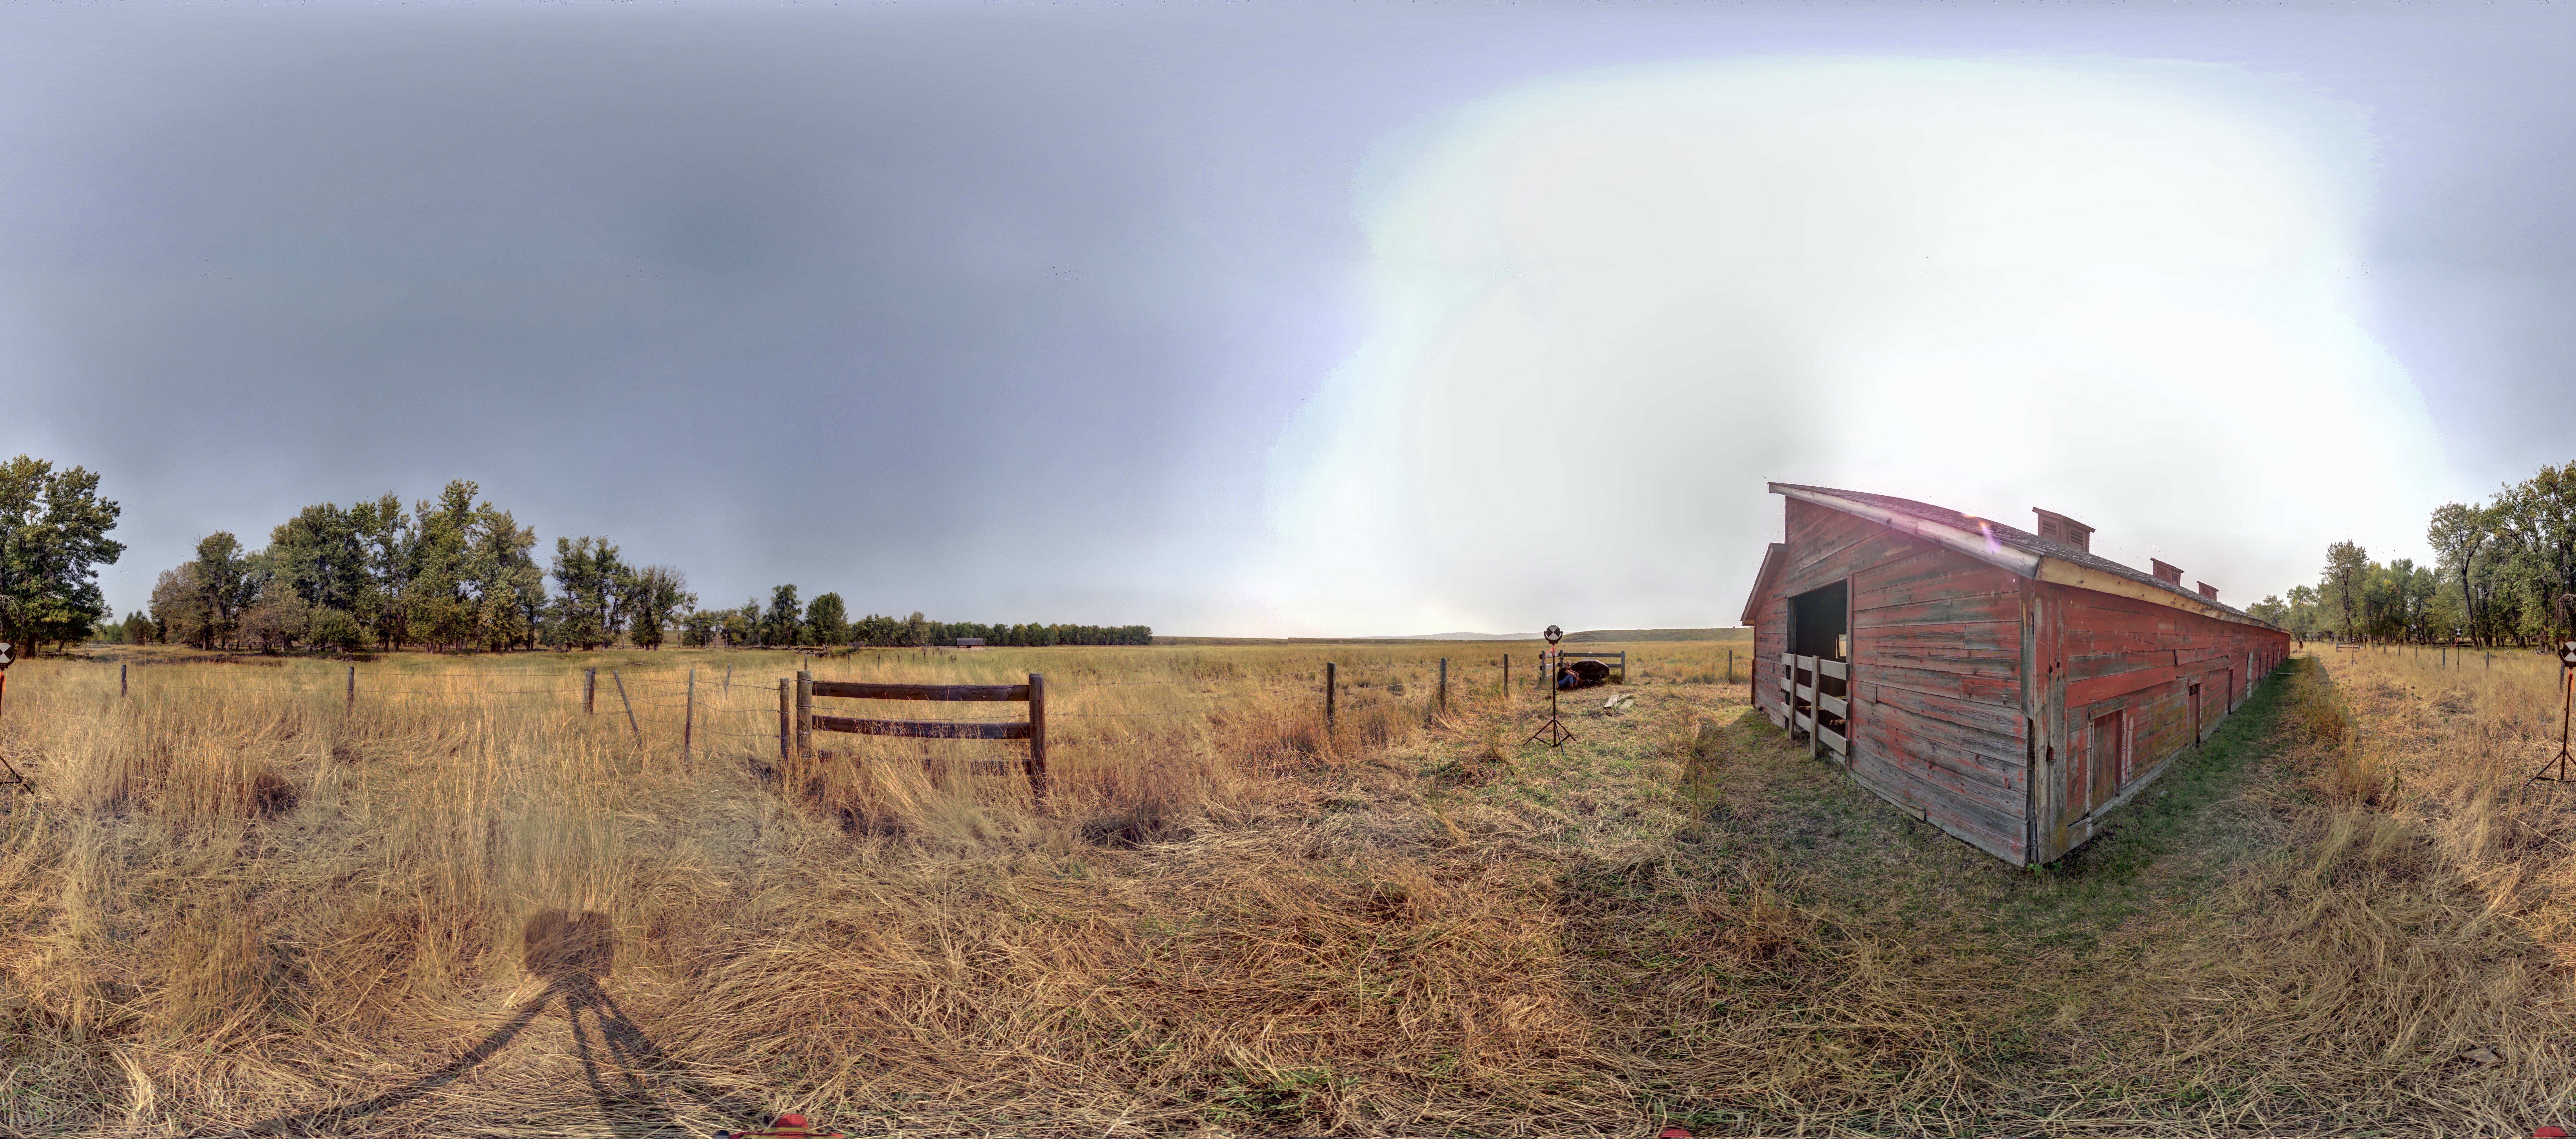 Panoramic image from scan location 16 of the exterior of the Piggery at Bar U Ranch